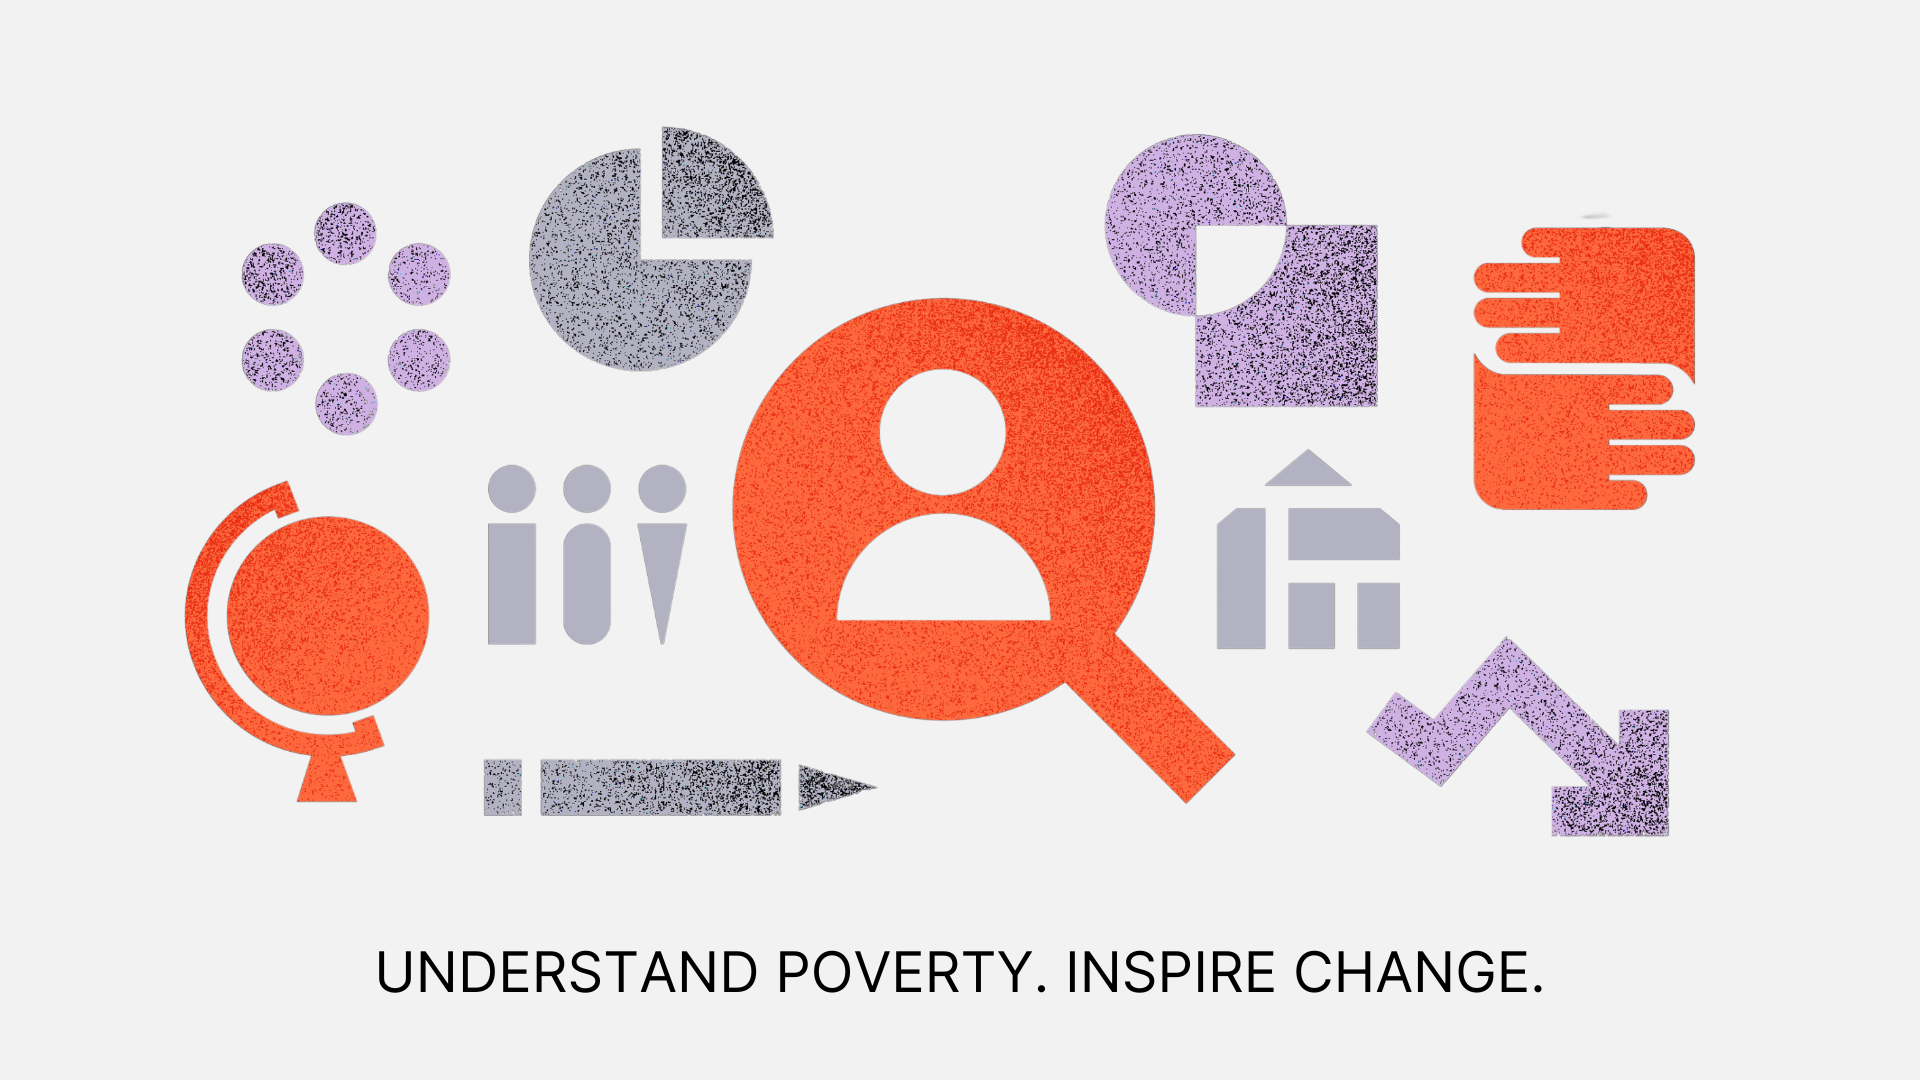 A series of orange, grey and purple icons to represent equality Insights. This incudes a magnifying glass, a pencil, globe, hands, and people among other changes. The words Únderstand  poverty. Inspire change' are below